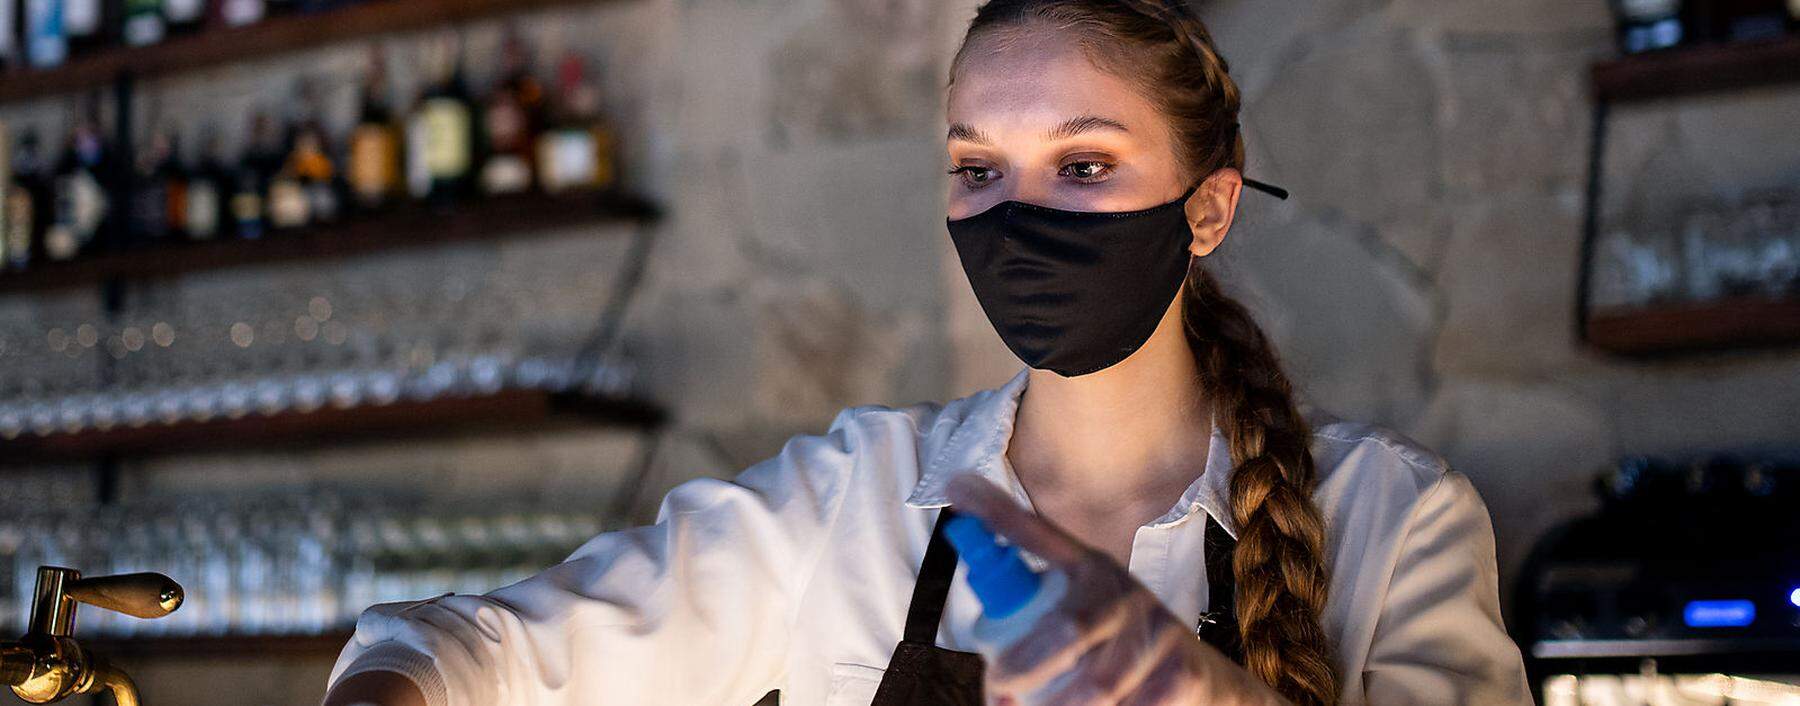 Waitress disinfecting surfaces in cafe, coronavirus and new normal concept.